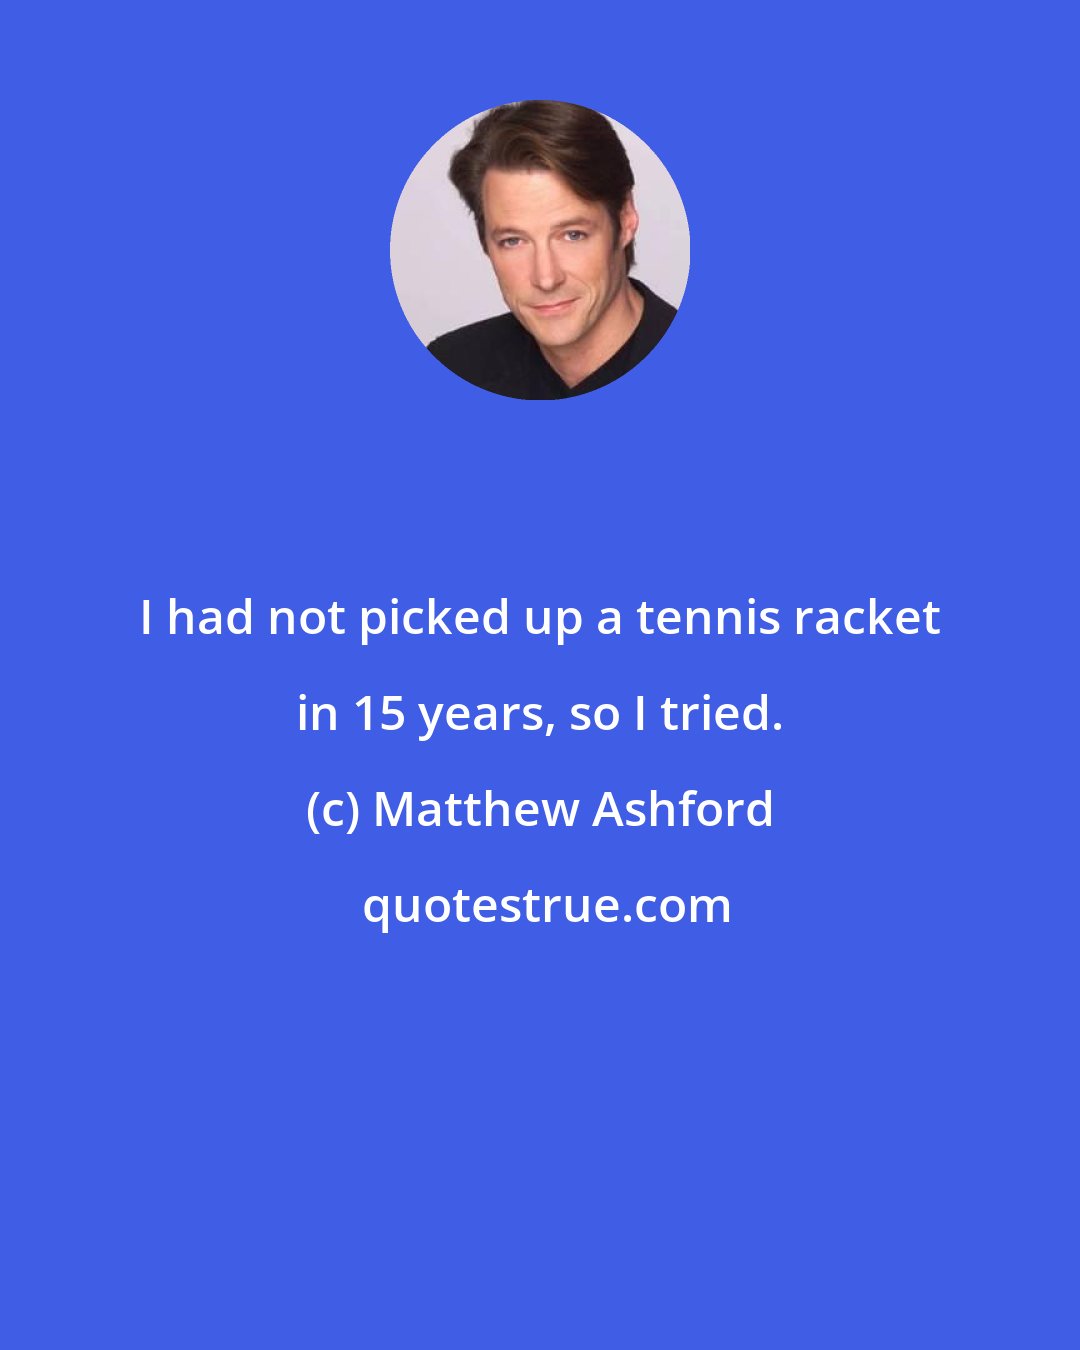 Matthew Ashford: I had not picked up a tennis racket in 15 years, so I tried.